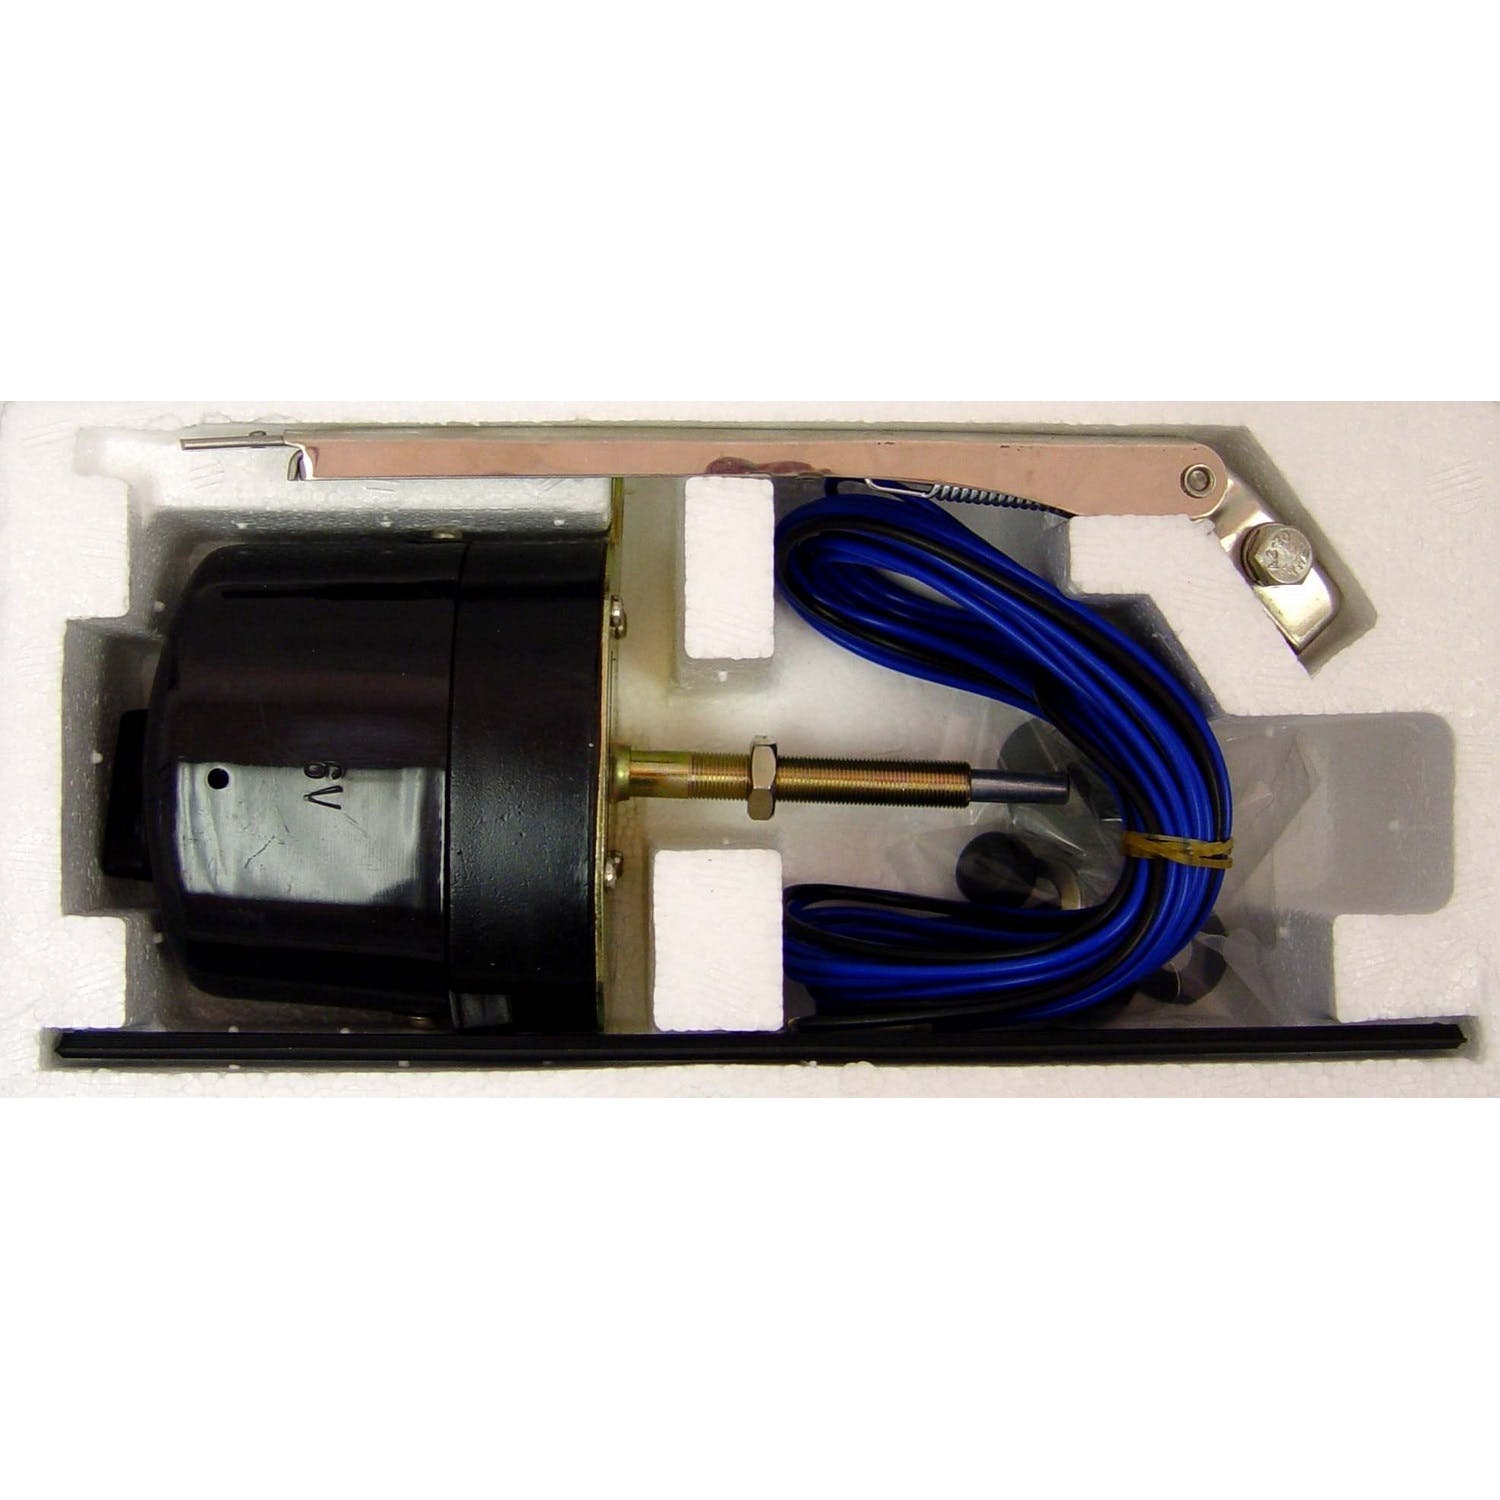 Omix-ADA 19101.01 Replacement 6-volt windshield wiper motor kit from Omix-ADA.